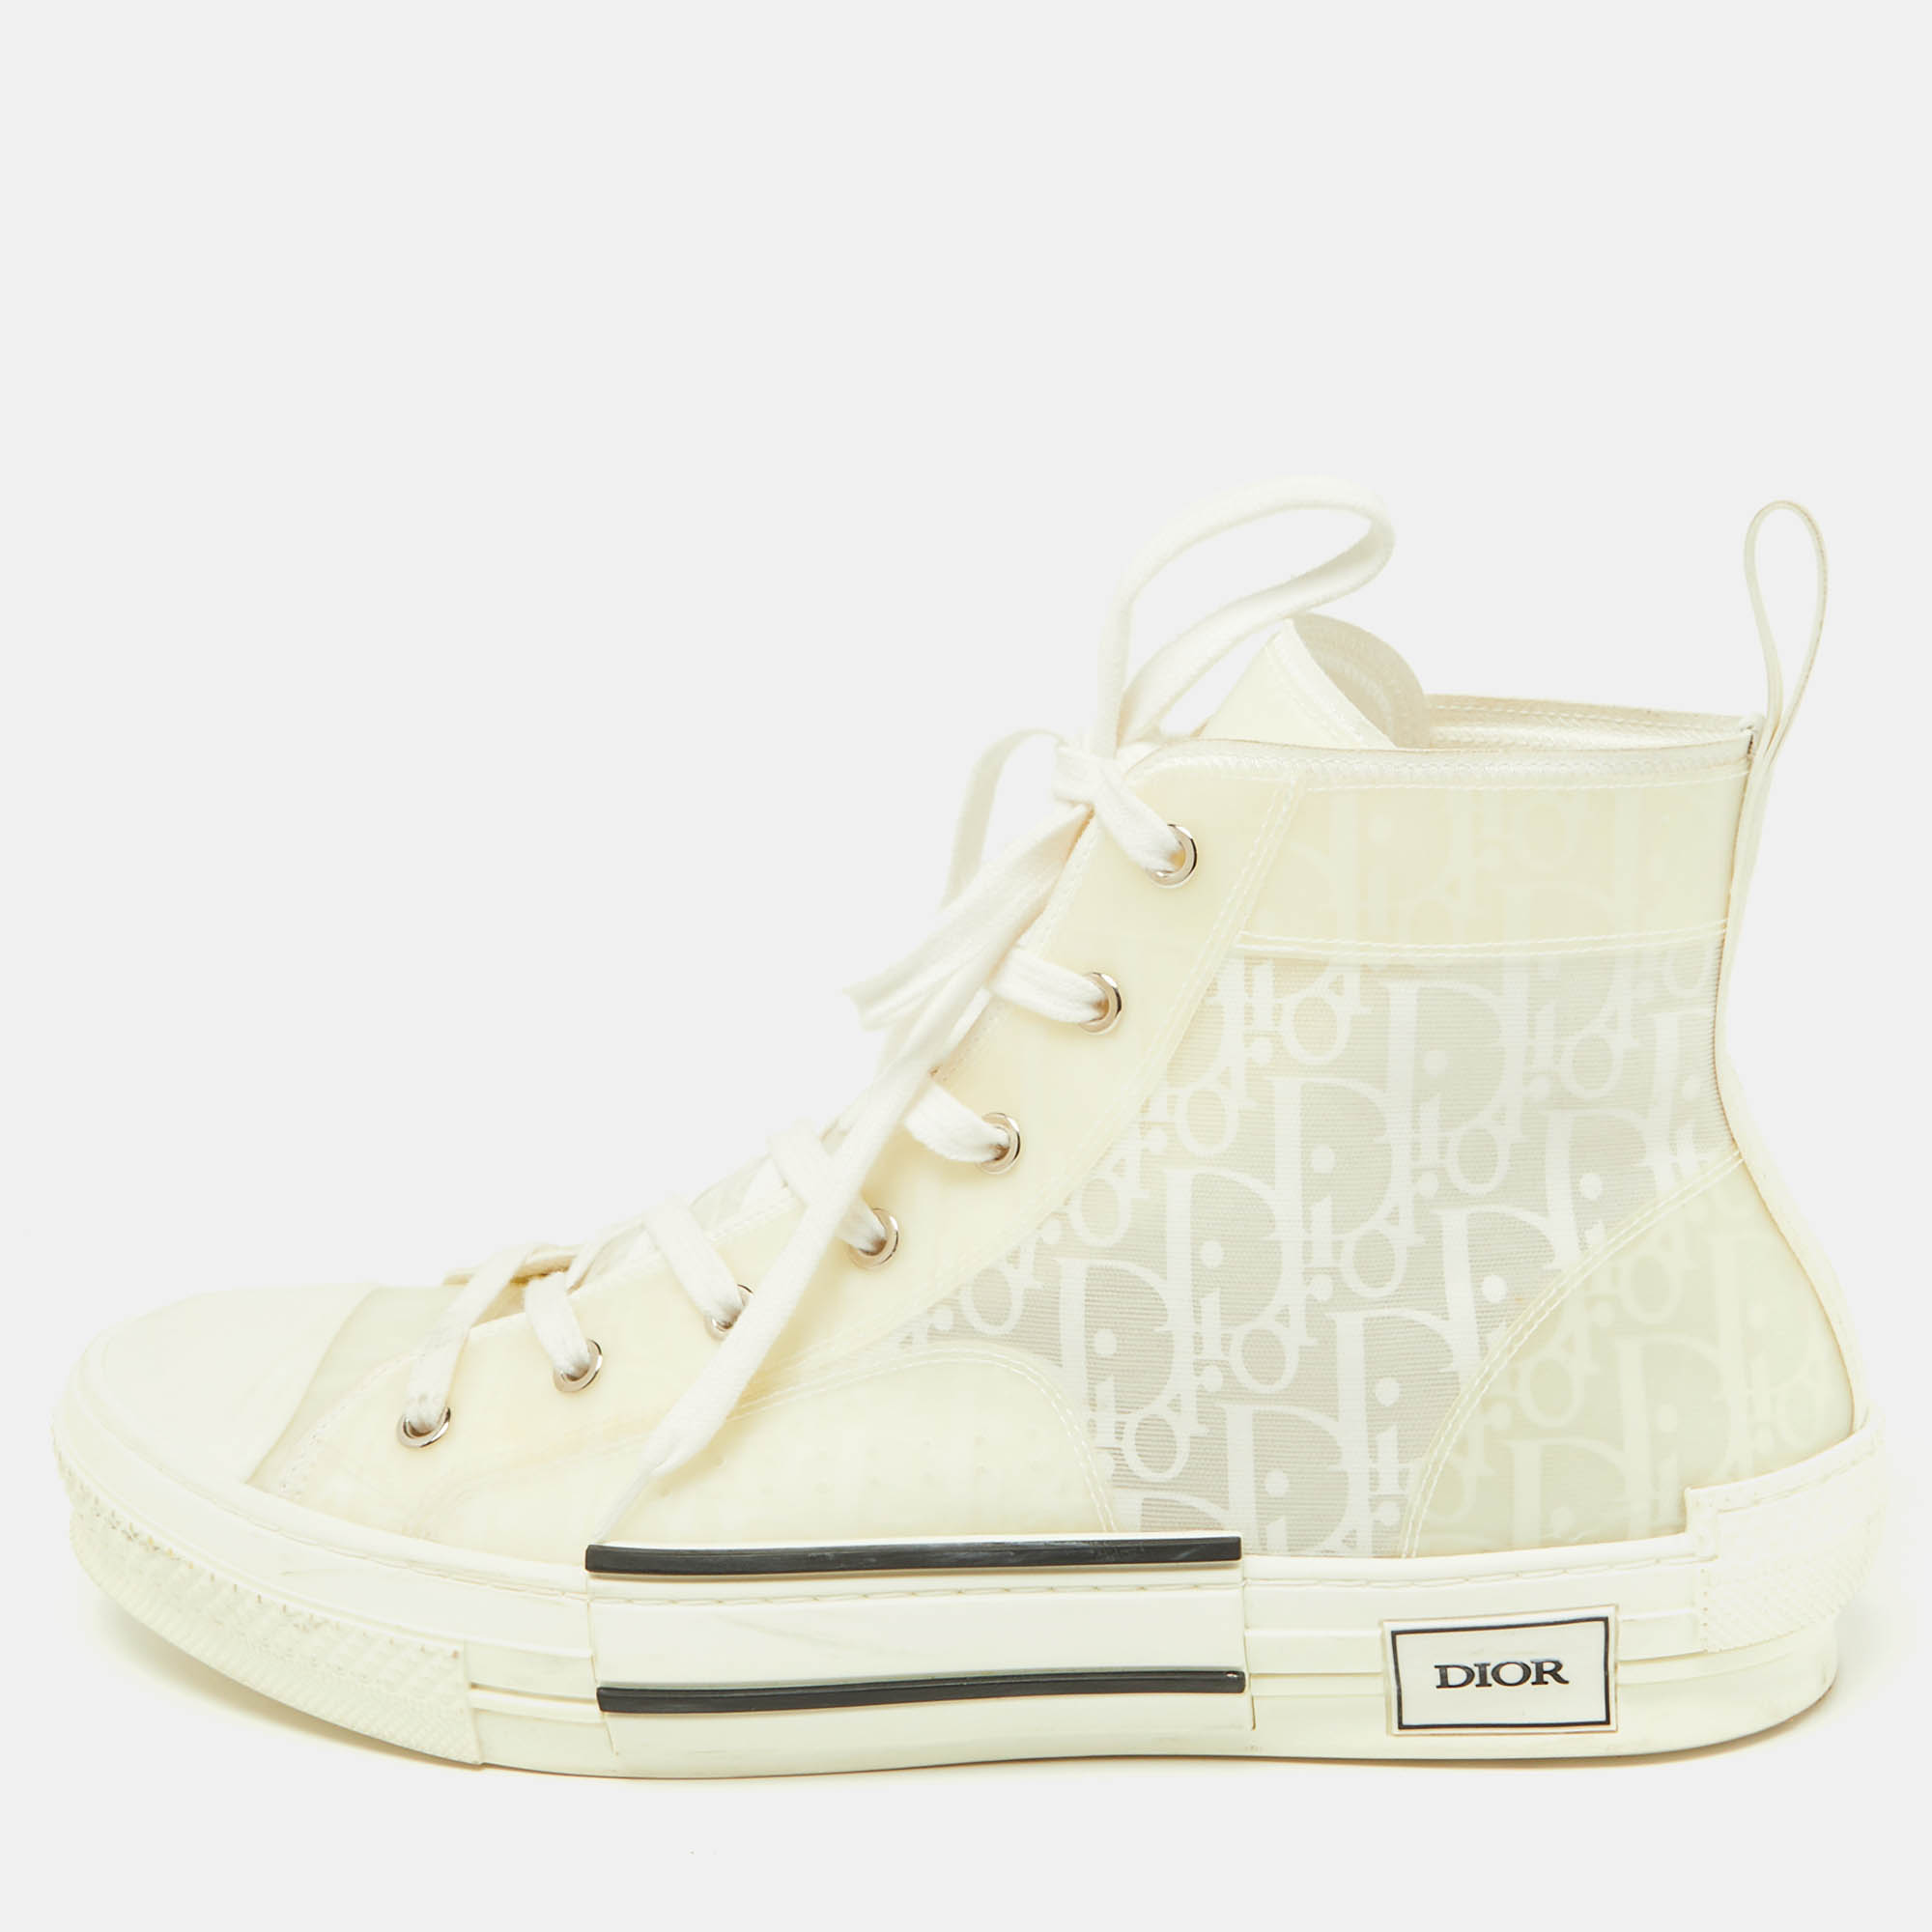 Dior white mesh and rubber b23 high top sneakers size 45